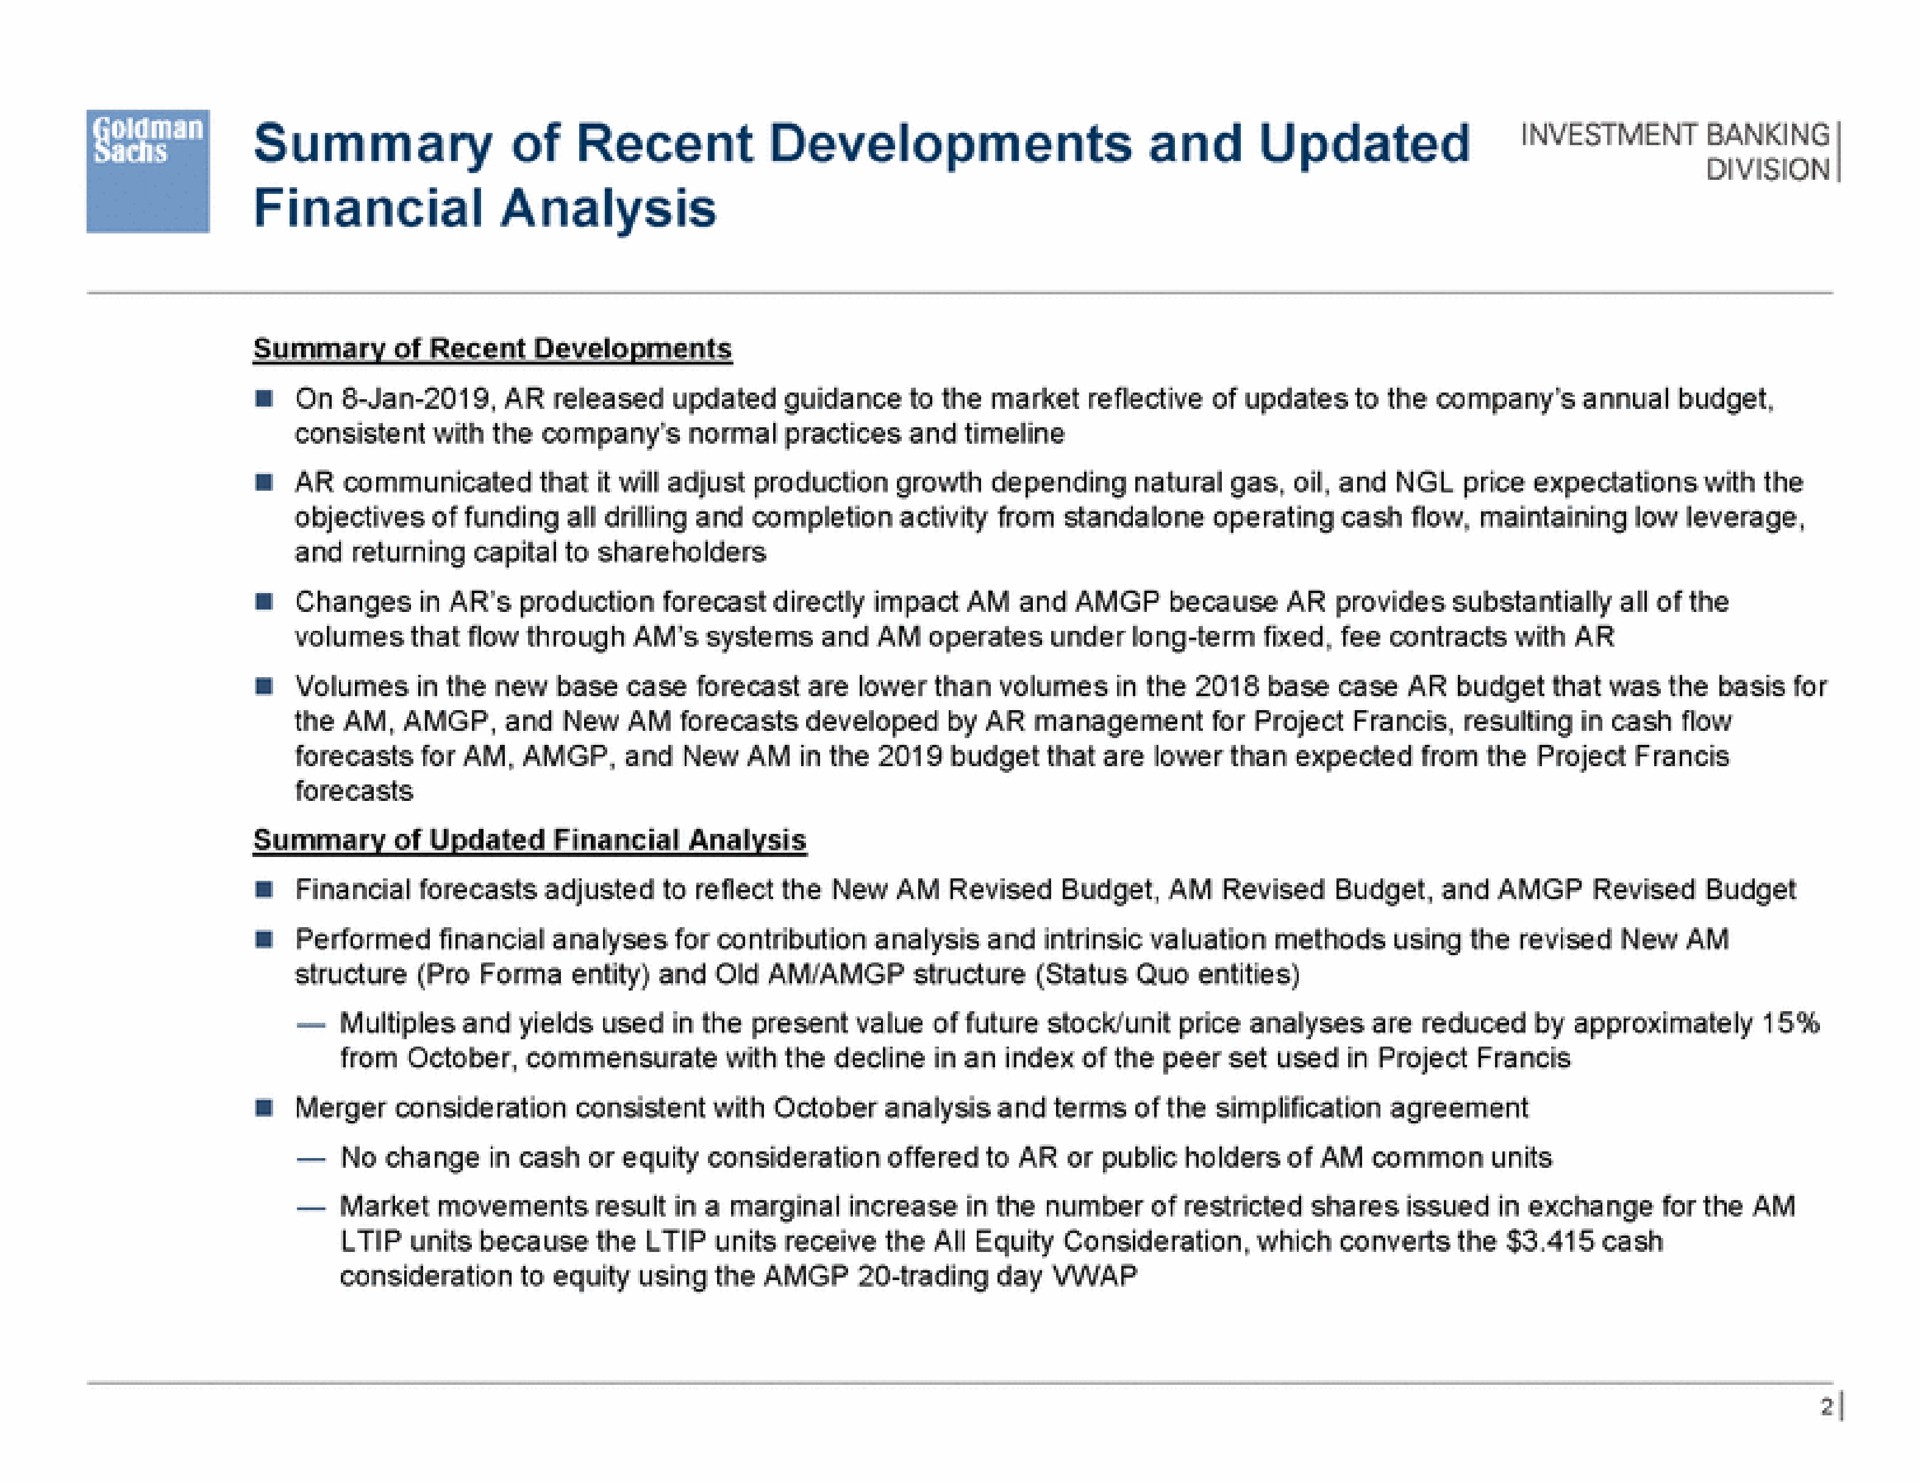 summary of recent developments and updated banking financial analysis | Goldman Sachs